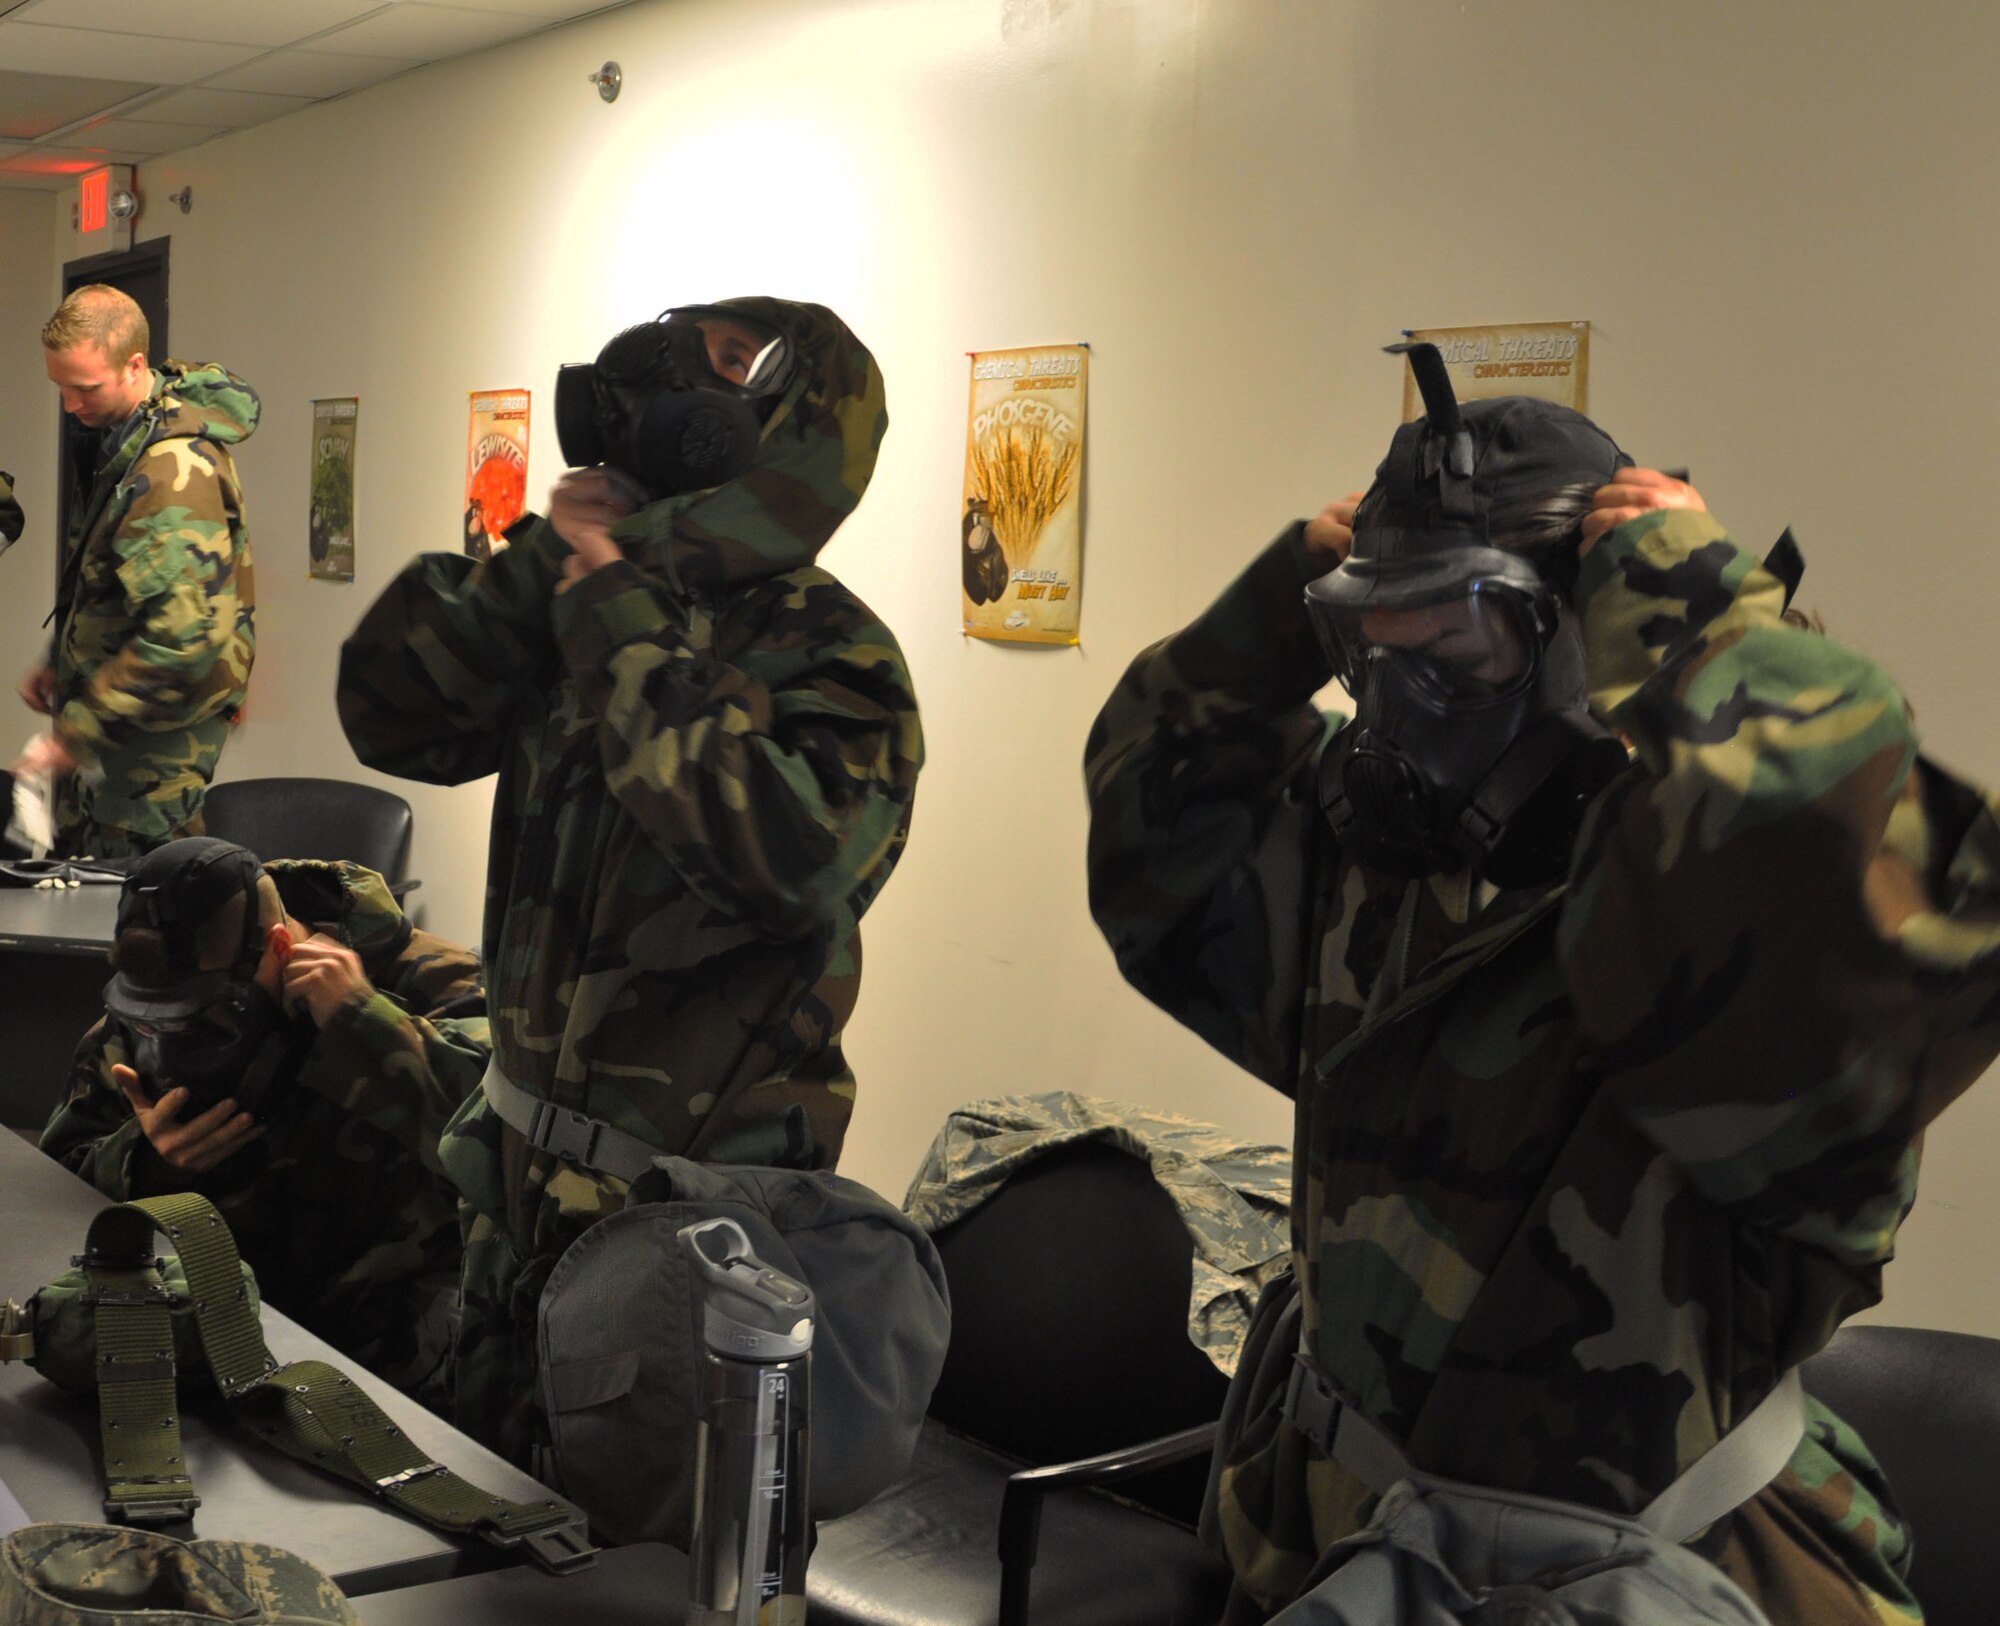 Members of the 931st Air Refueling Group don their mission oriented protective postures gear (MOPP) during a CBRNE training session April 12, 2015, McConnell Air Force Base, The class ensures Airmen can work and survive in a chemical environment and that they are also prepared to handle any hazardous materials. (U.S. Air Force photo by Tech. Sgt. Abigail Klein)